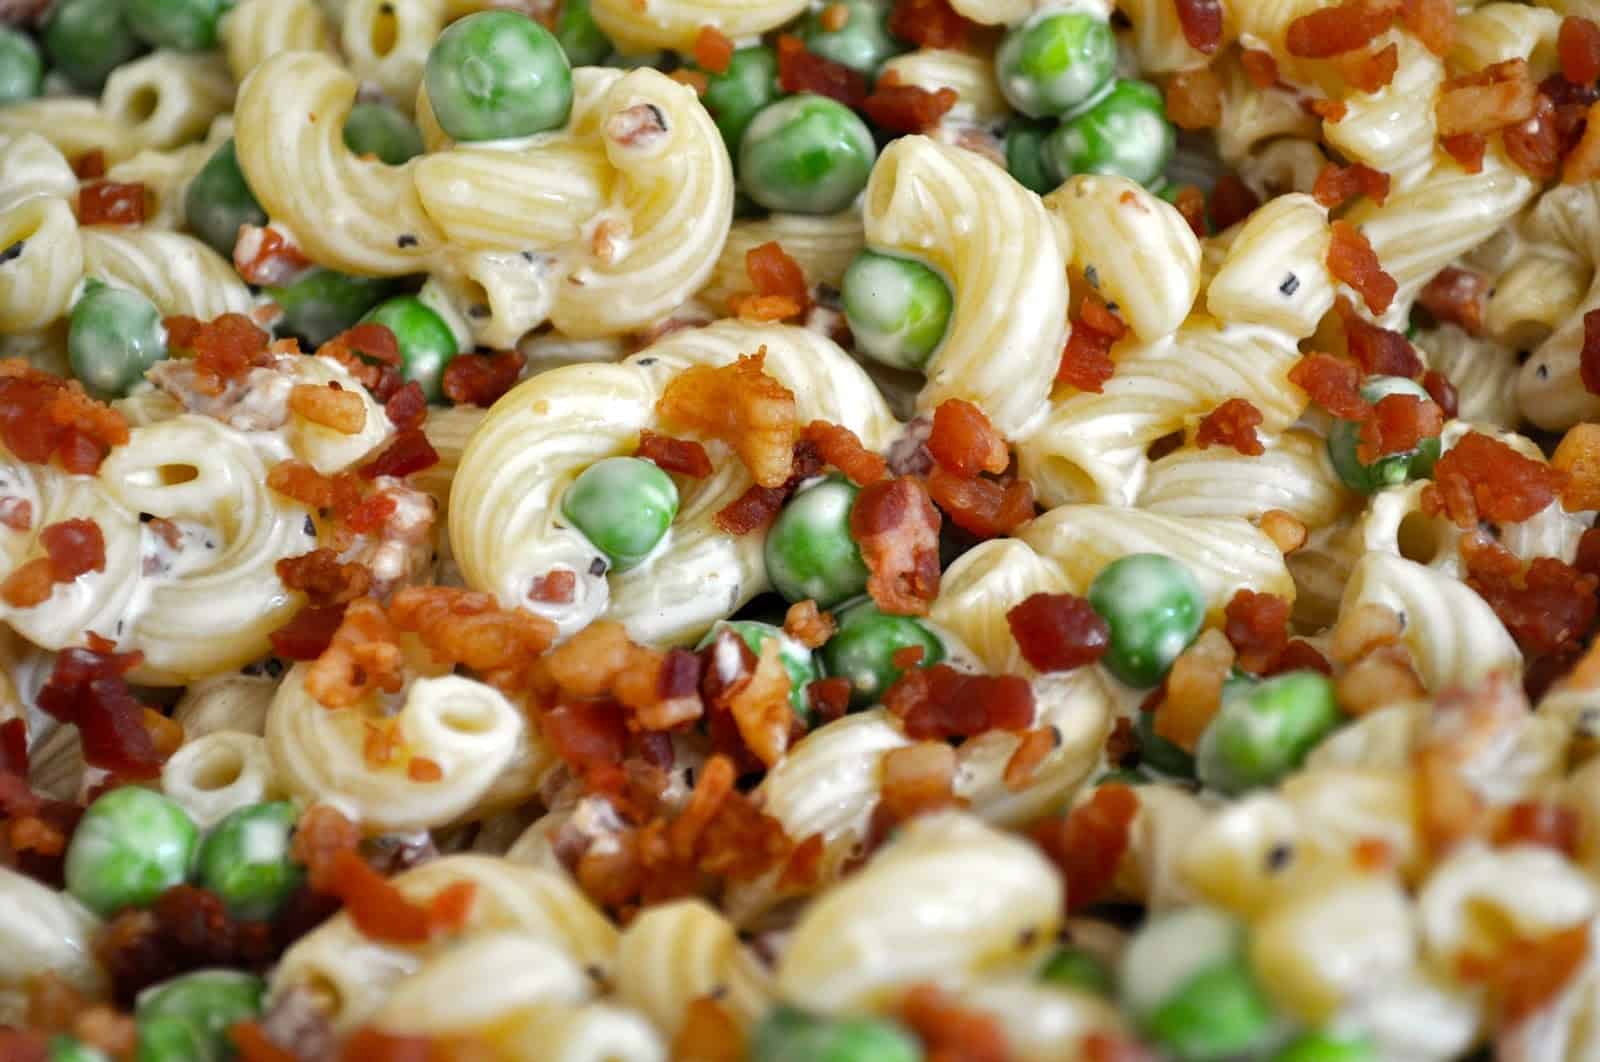 Bacon ranch macaroni salad with peas, bacon, and a ranch dressing.